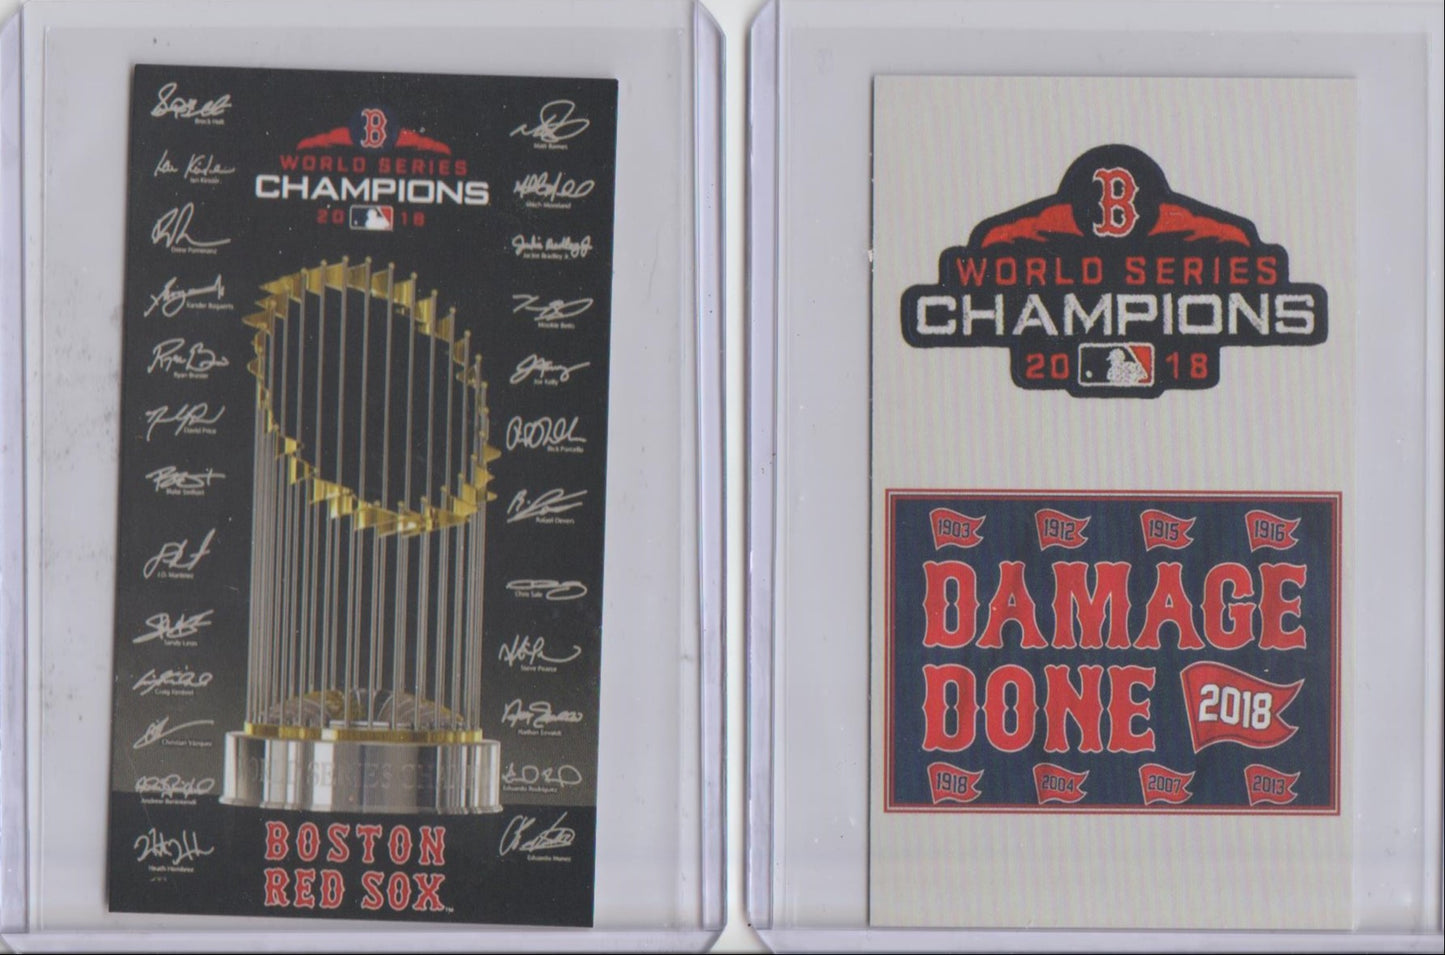 Boston Red Sox 2013 World Series Champions Signature Trophy Card RP